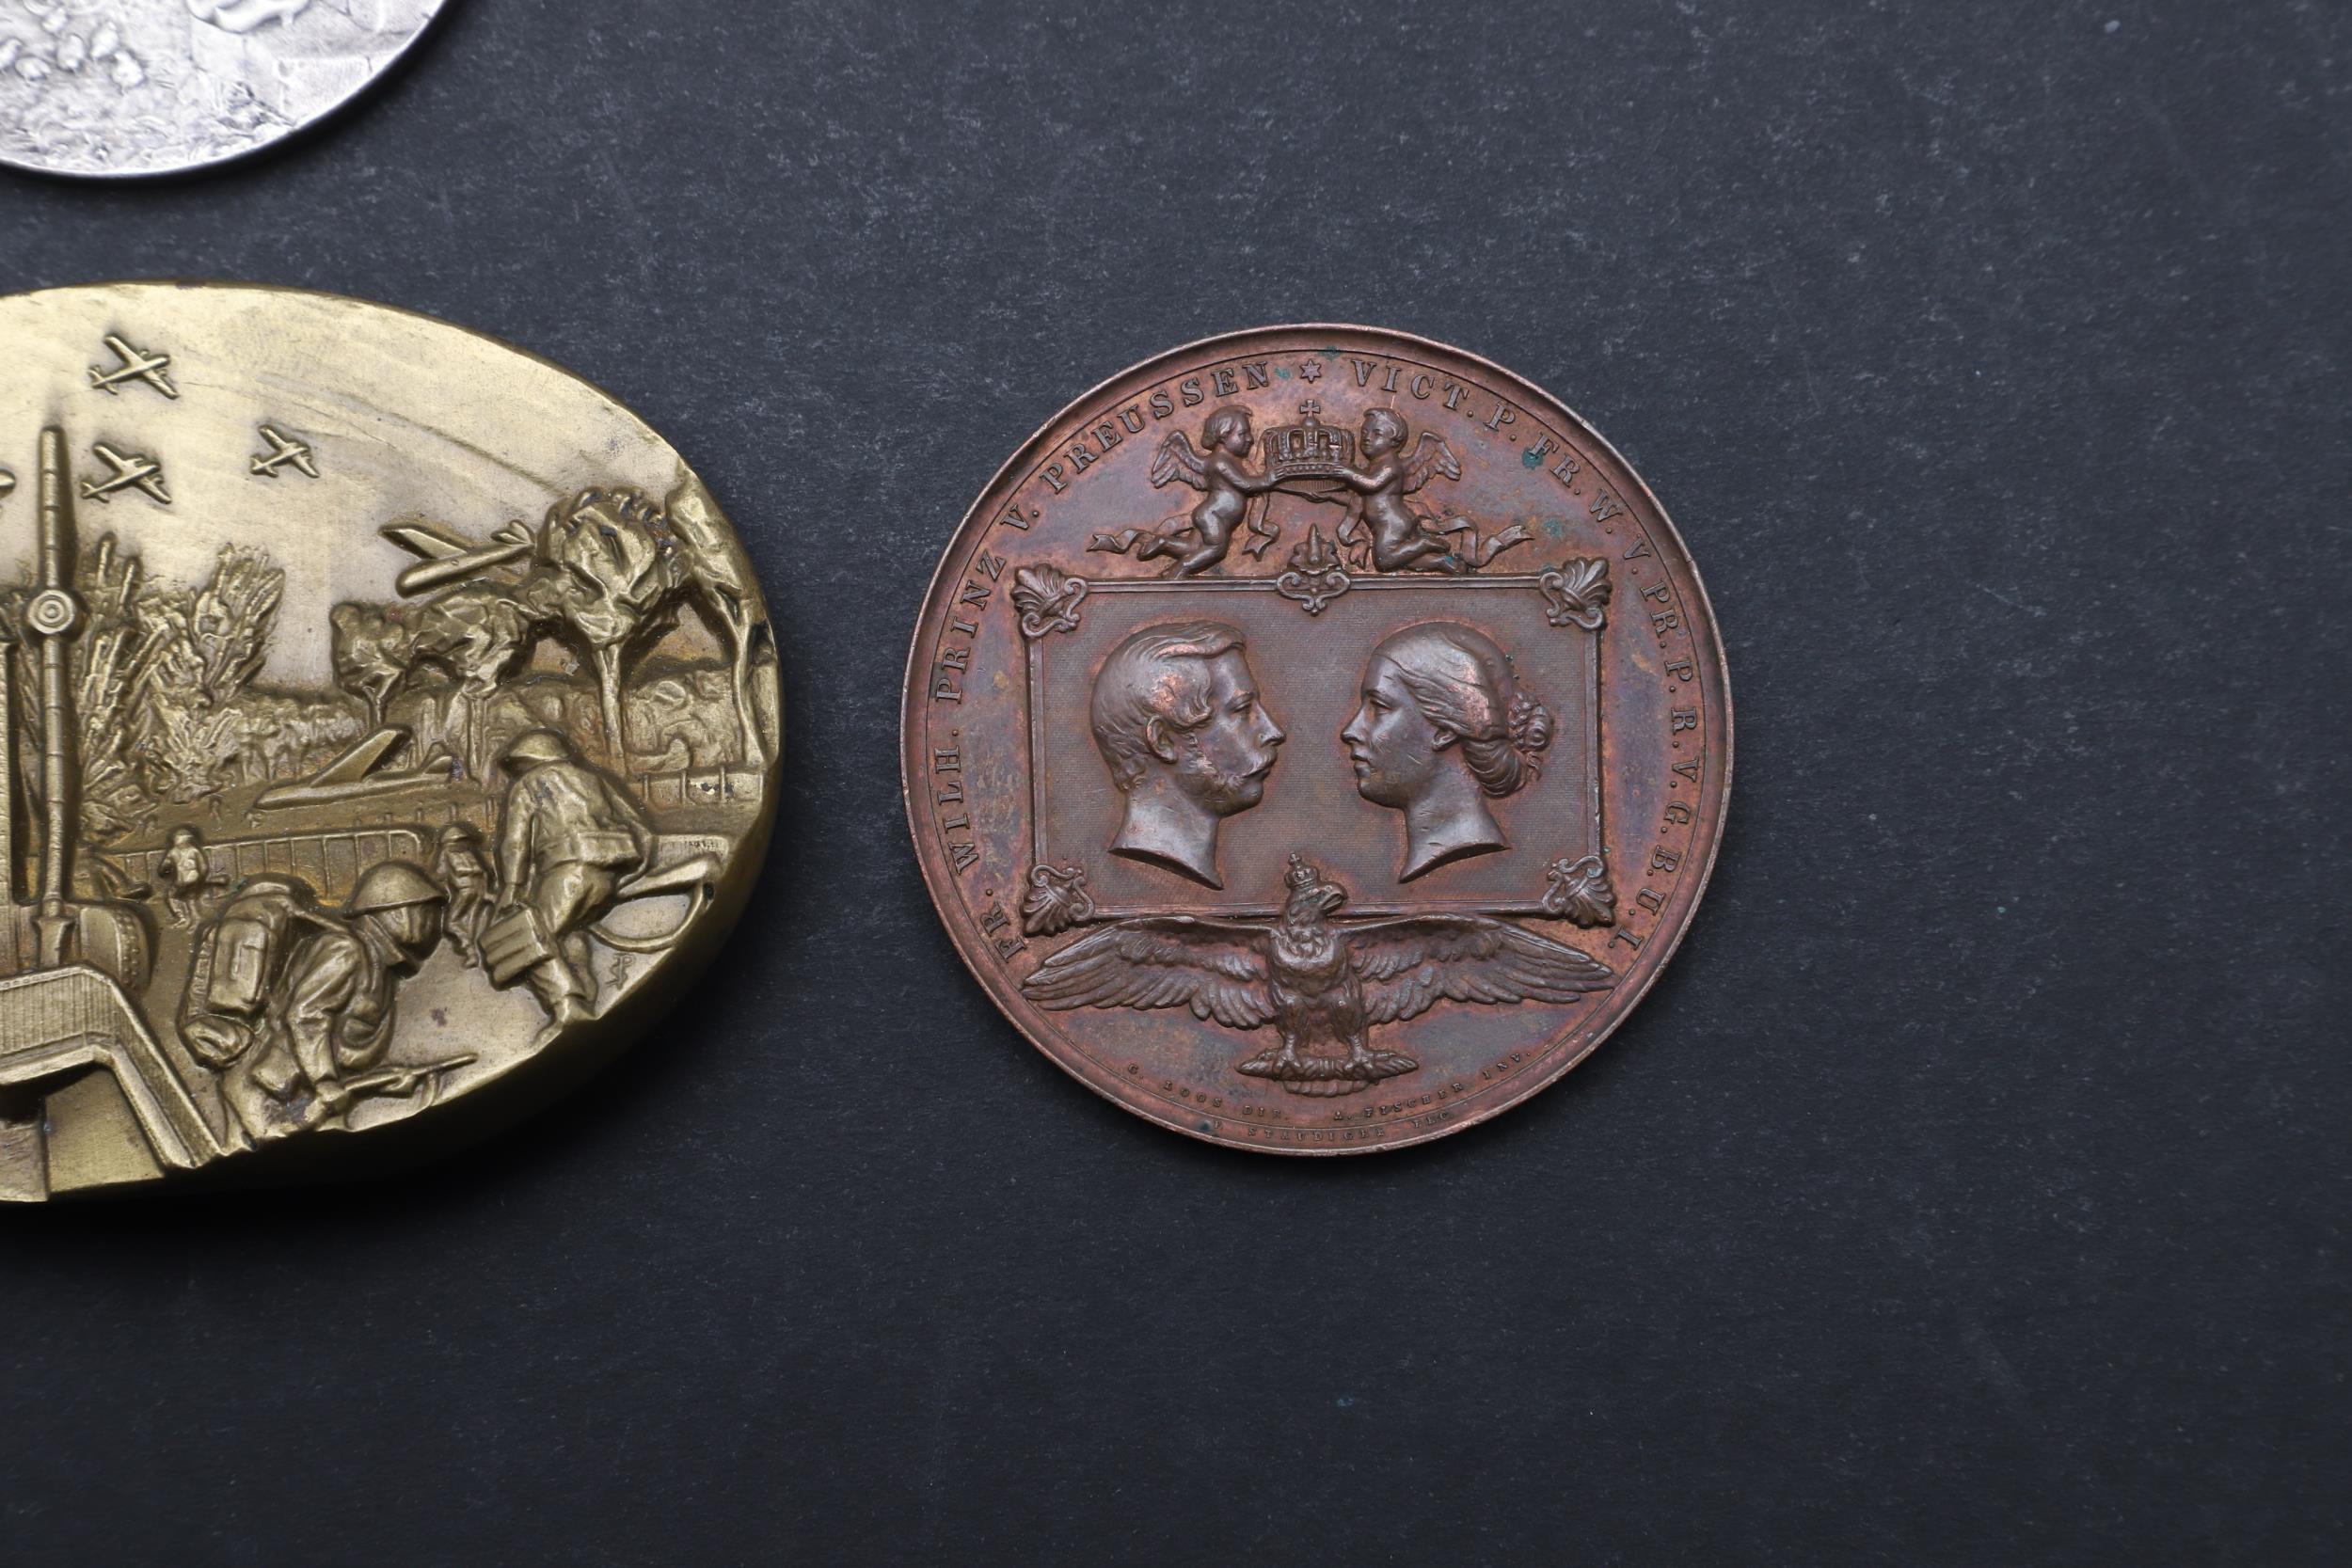 AN HISTORIC MEDAL COMMEMORATING THE BIRTH OF KAISER WILHELM II, AND THREE OTHERS. - Image 5 of 7